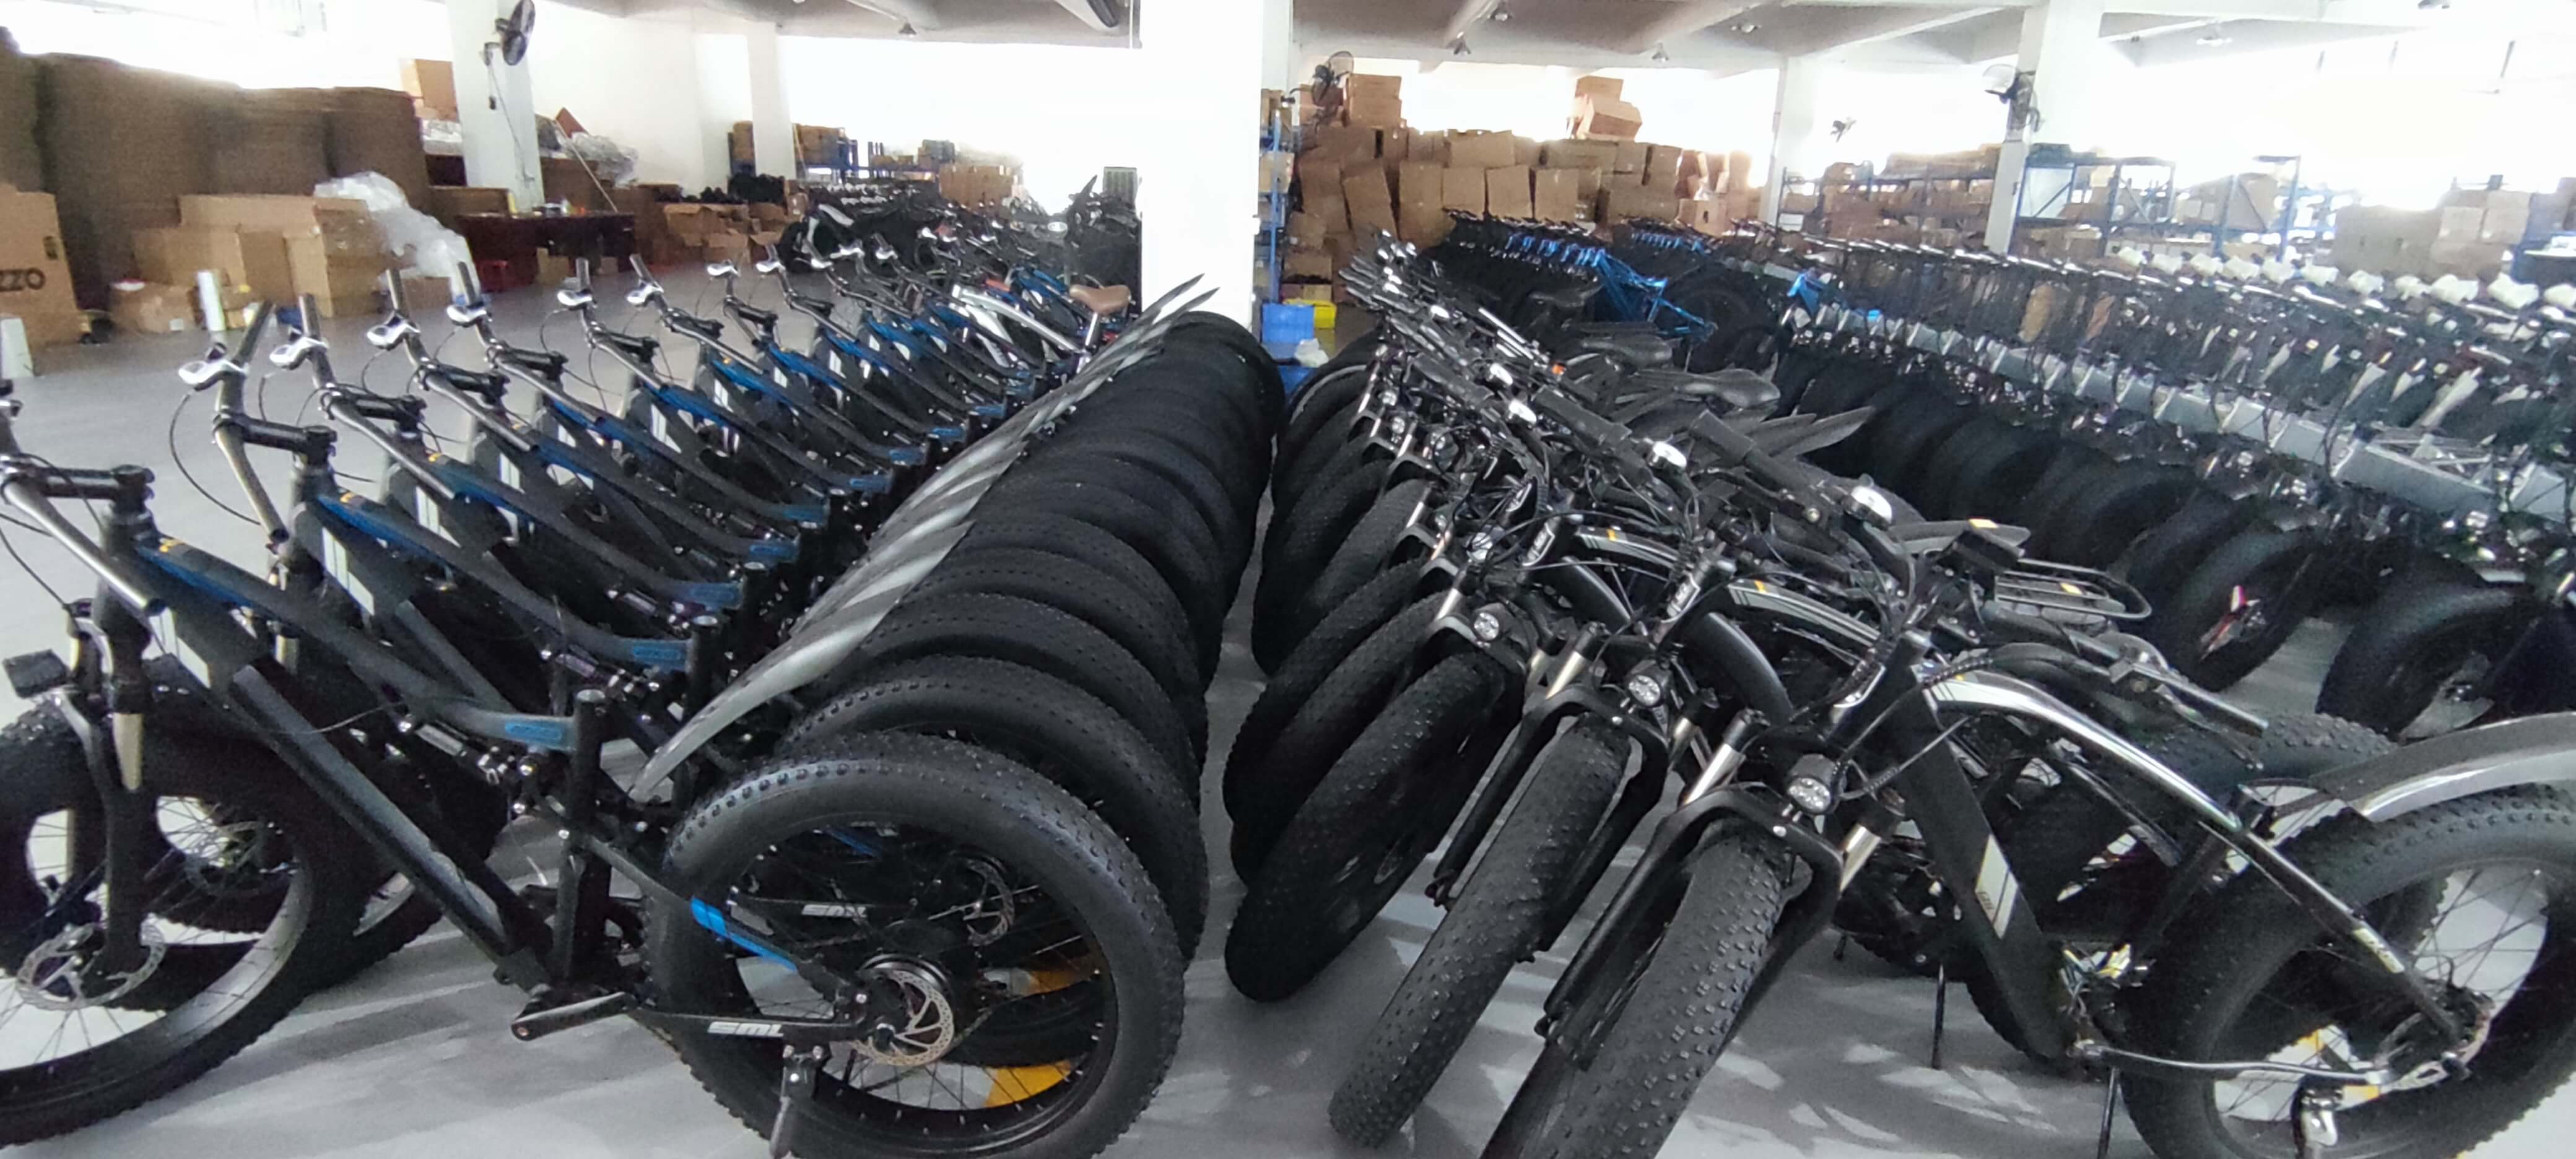 Shengmilo-bikes.com-is-the-only-manufacturer-of-Shengmilo-Mark